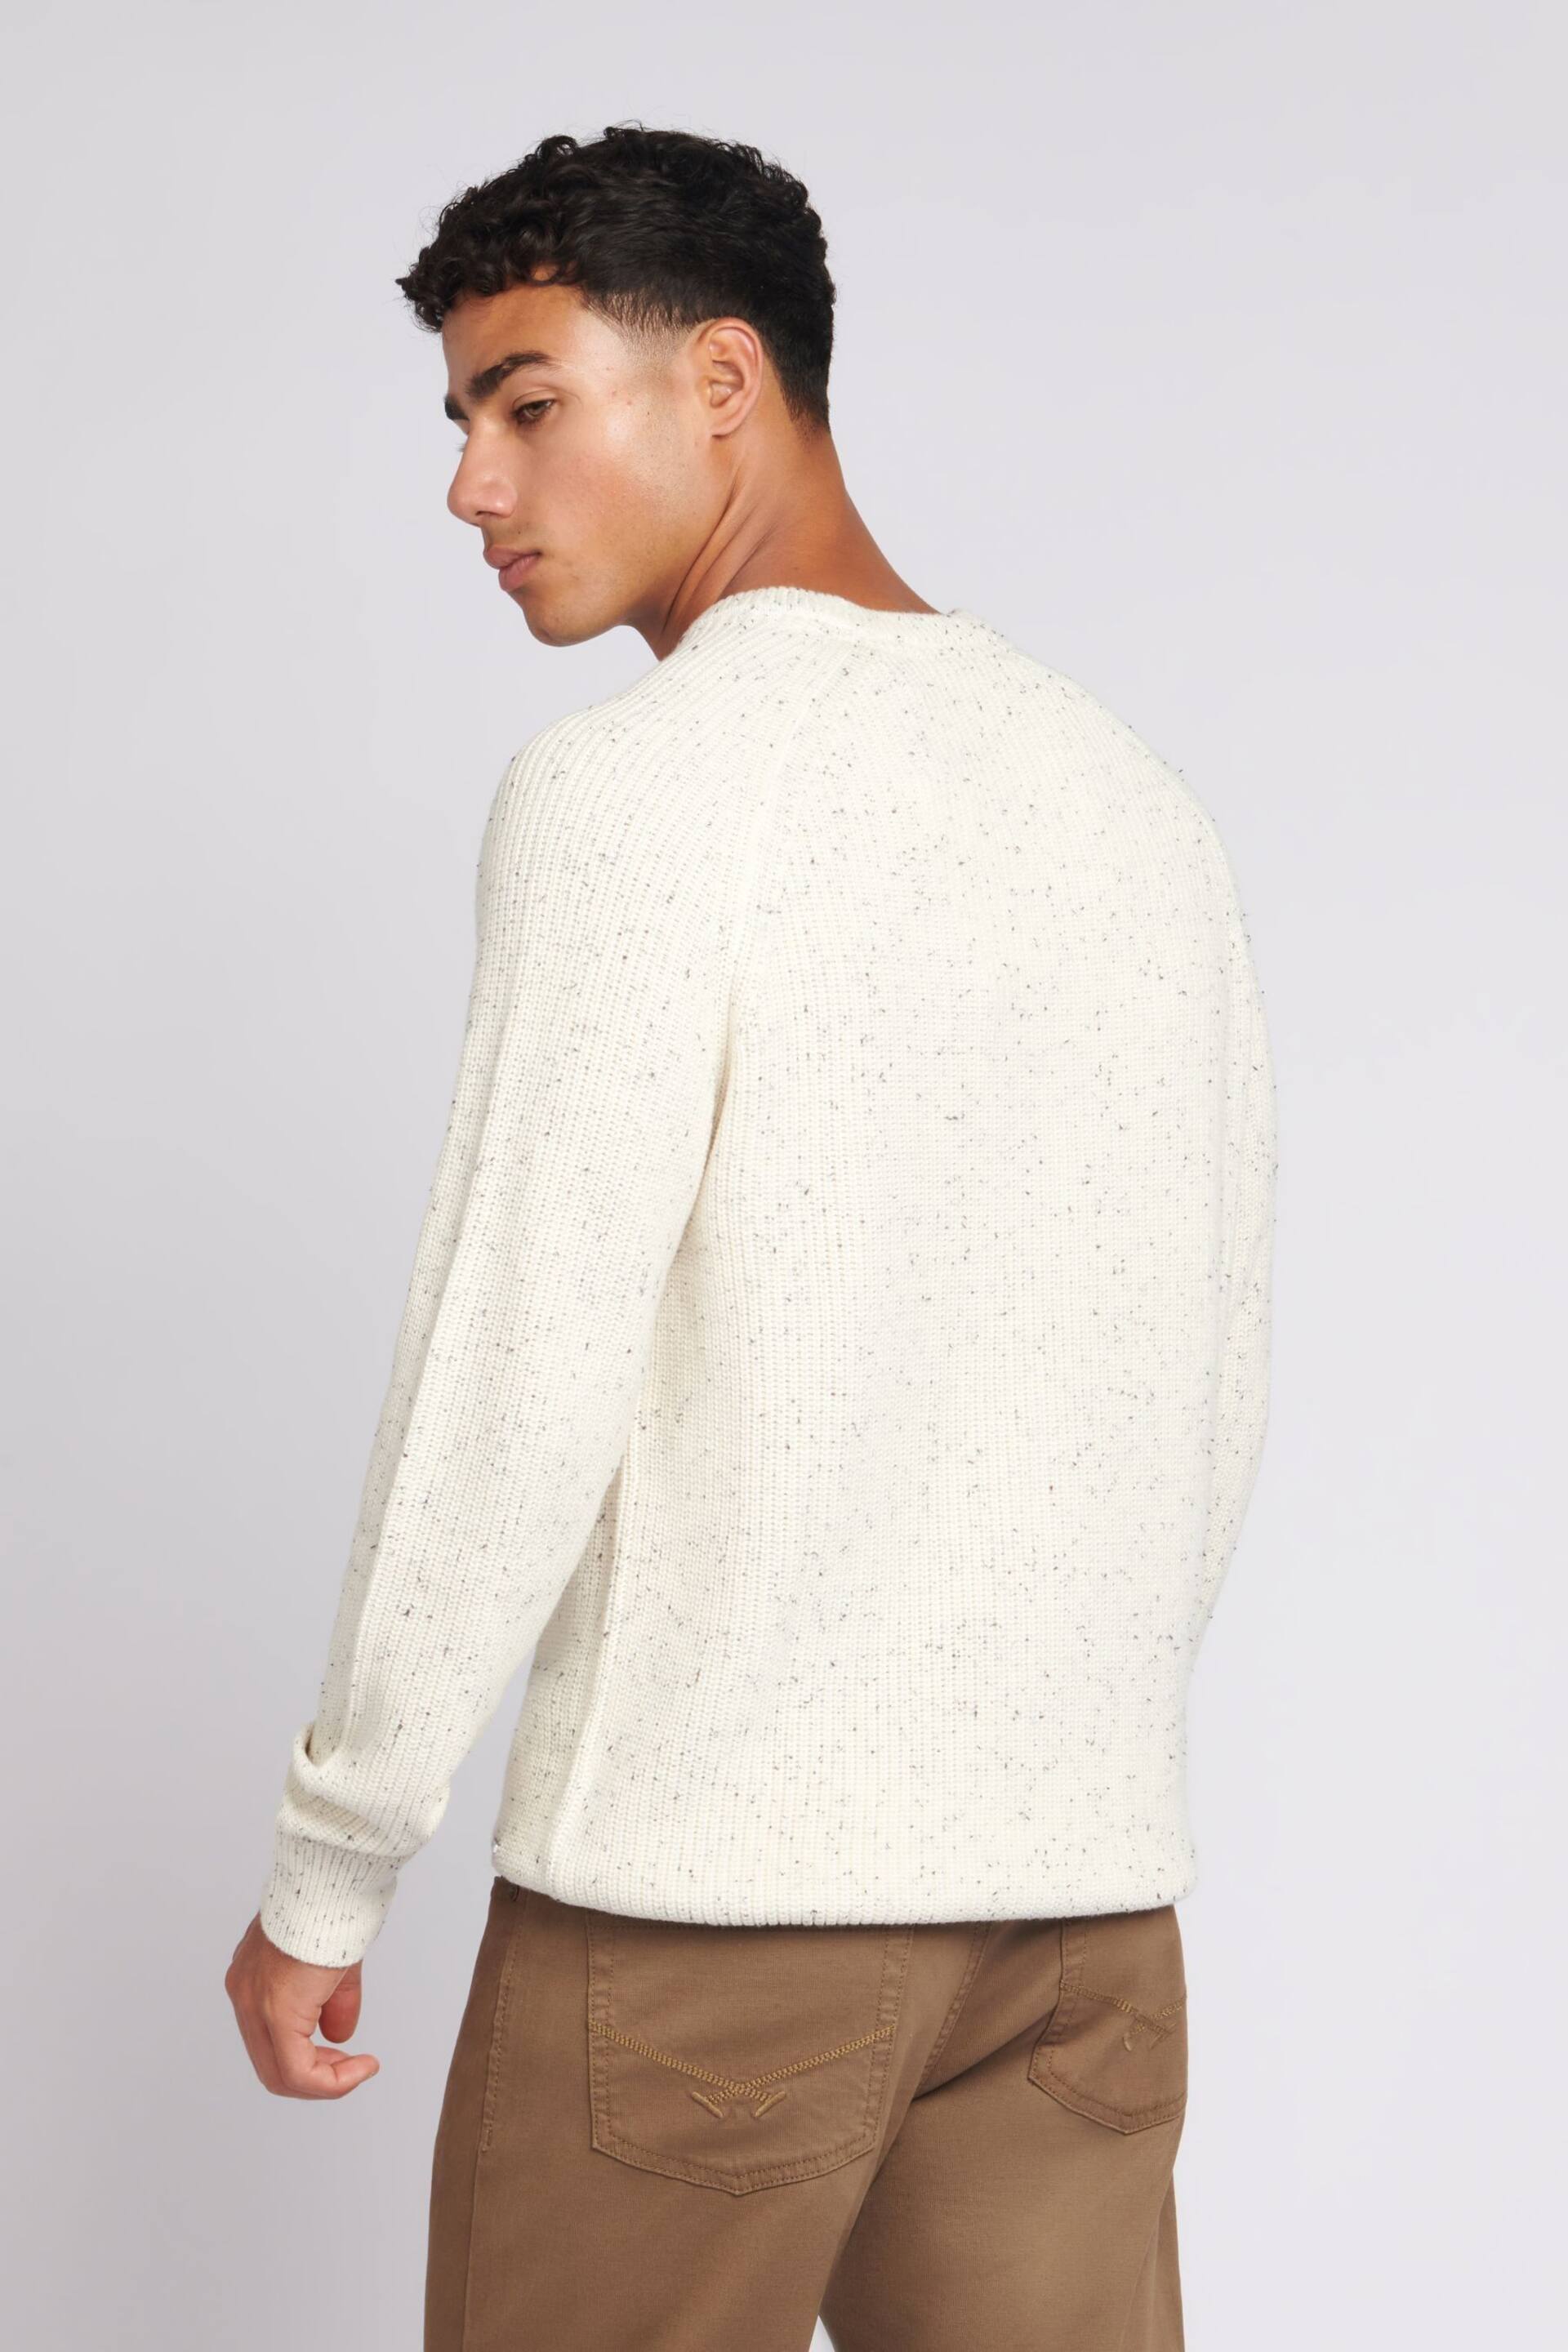 U.S. Polo Assn. Mens Cream Fisherman Nepp Knitted Jumper - Image 2 of 8